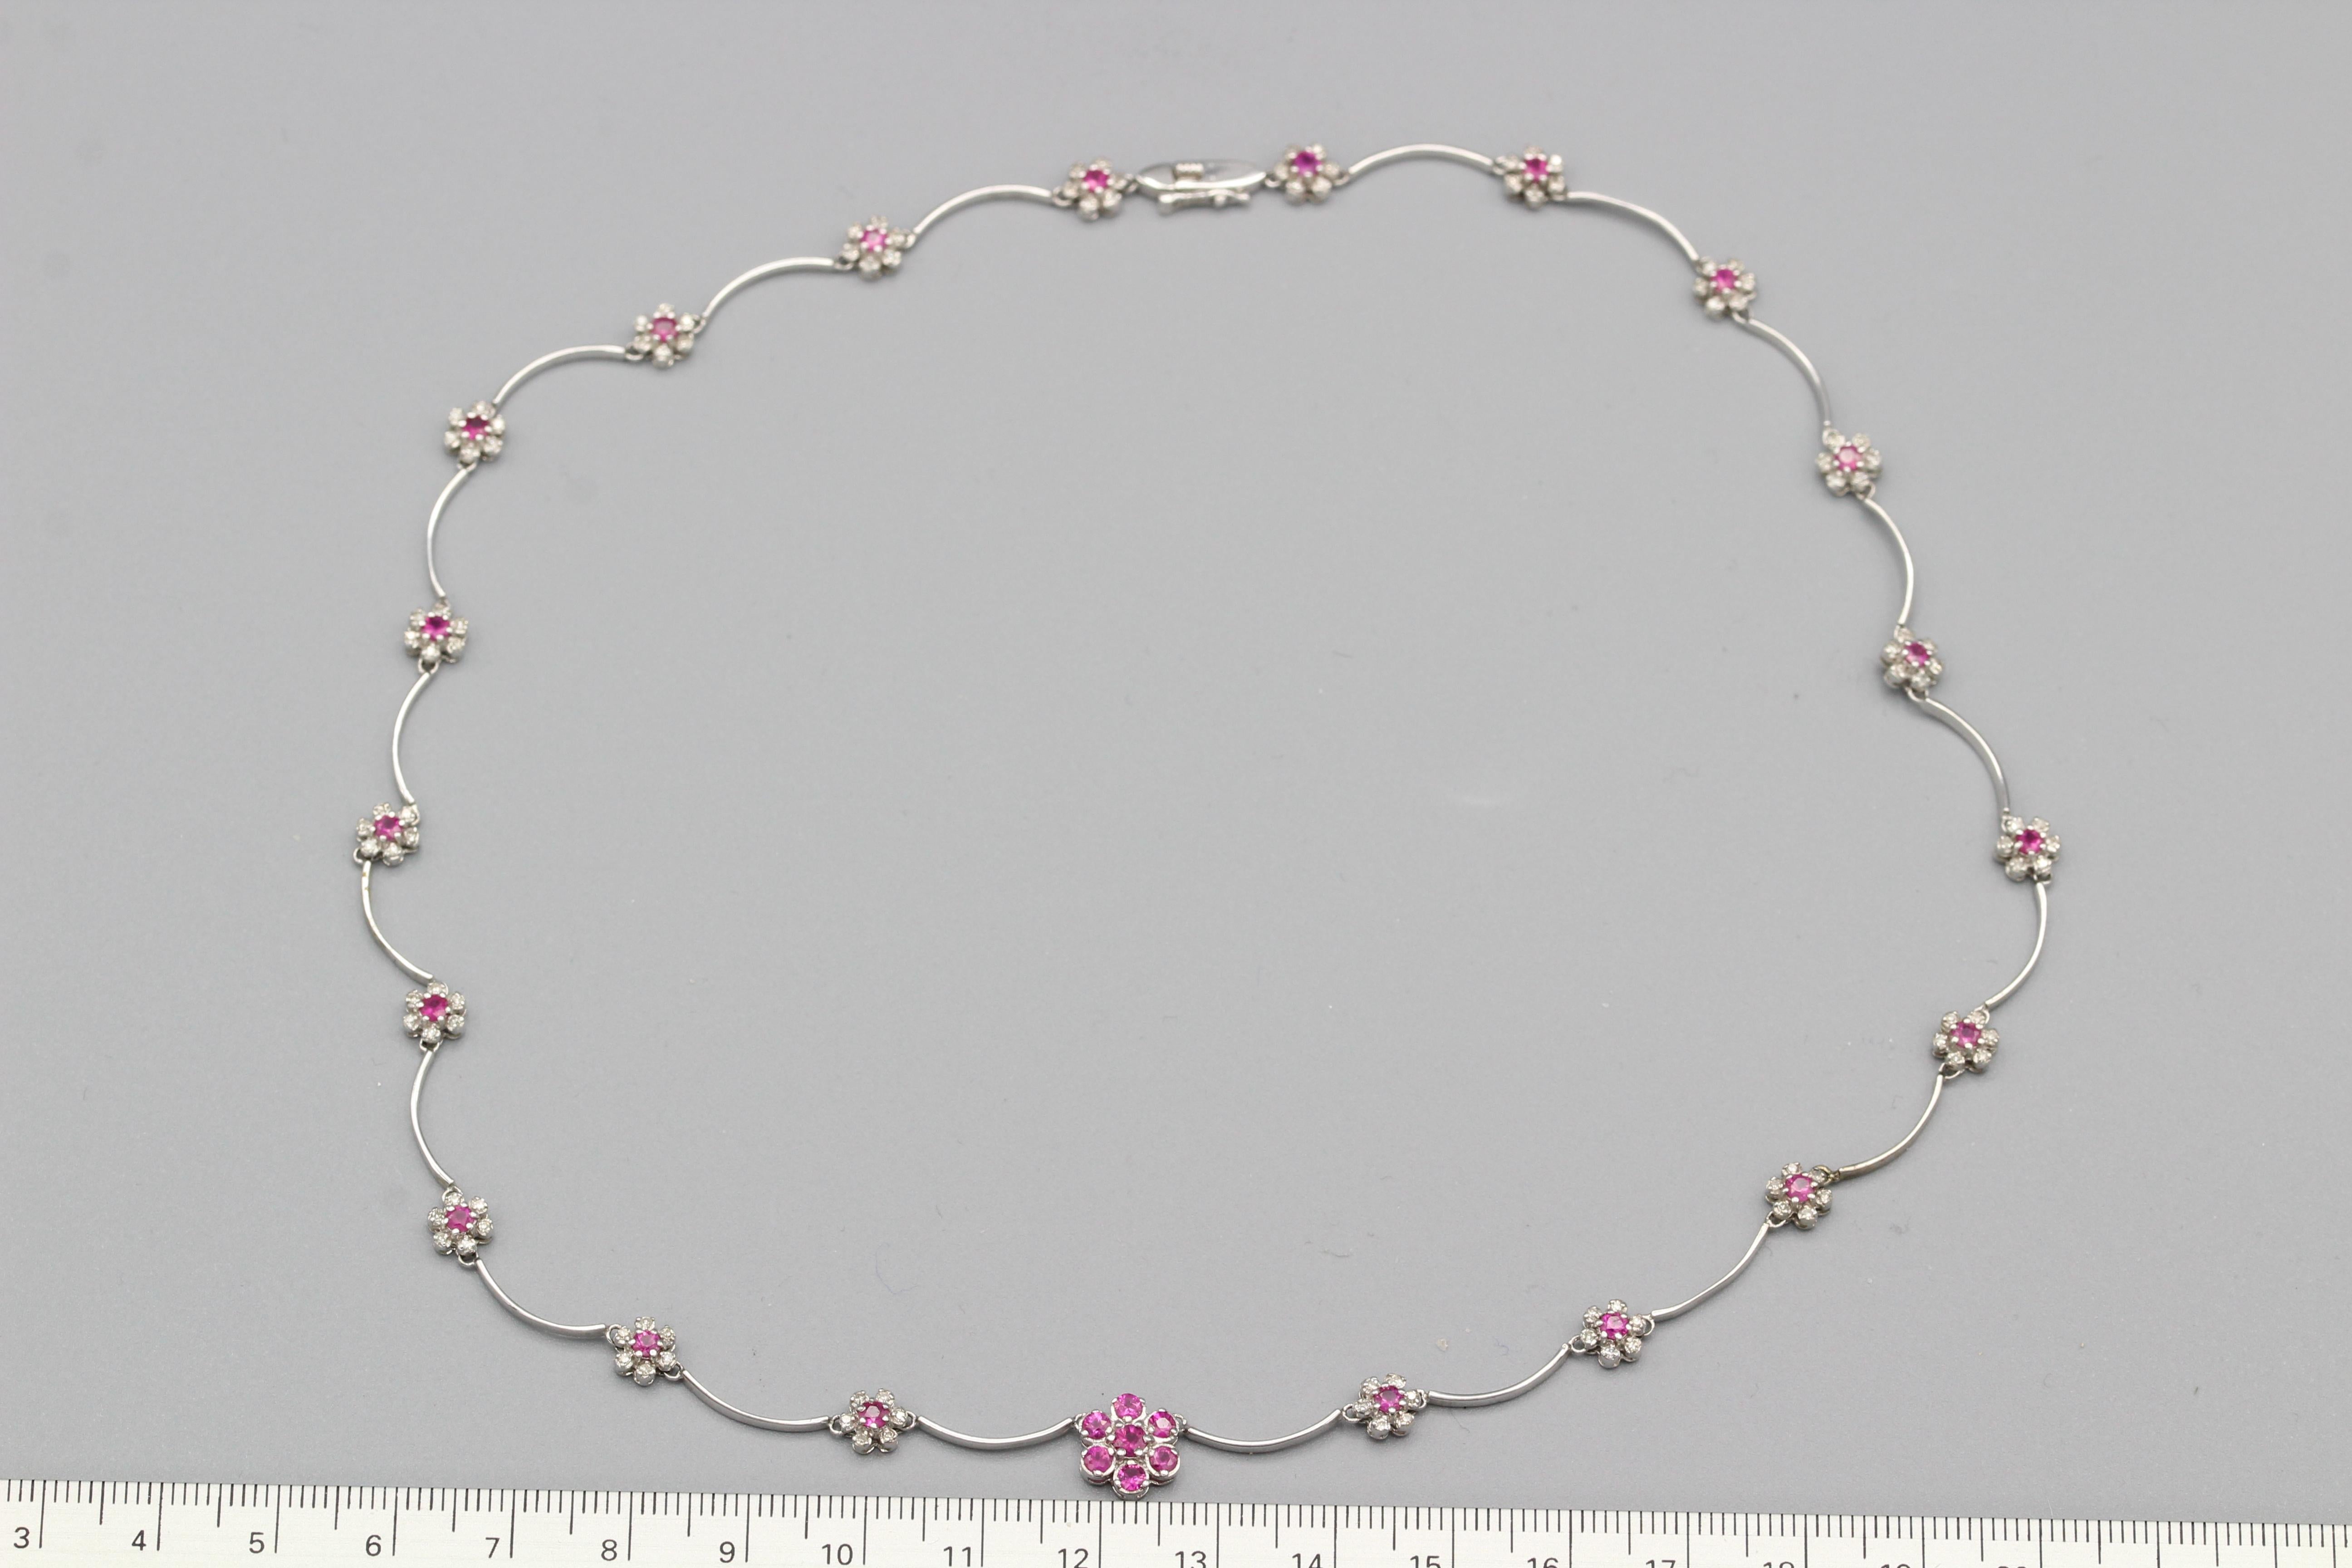 Elegant Flower necklace made of
Natural Ruby and Diamonds.
14k White Gold approx 10.20 grams
Total Ruby approx 2.00 carat
Total Diamonds 0.60 carat
Length of necklace approx 17.5' Inch
Gift Box Included